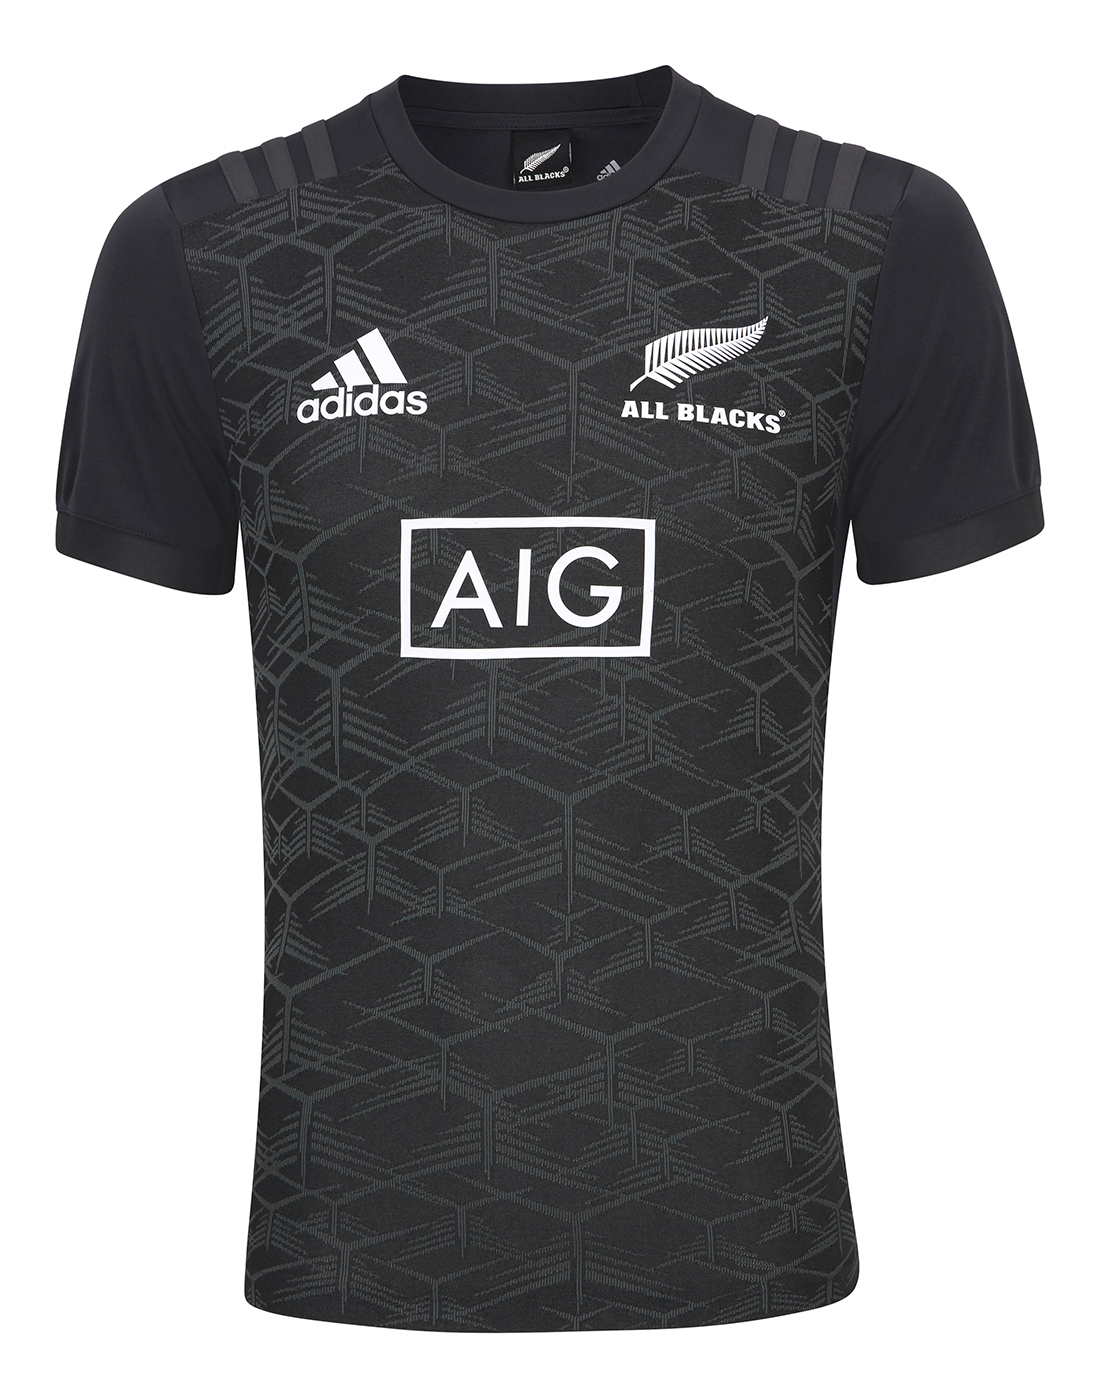 All Blacks Rugby Performance T-Shirt | Life Style Sports